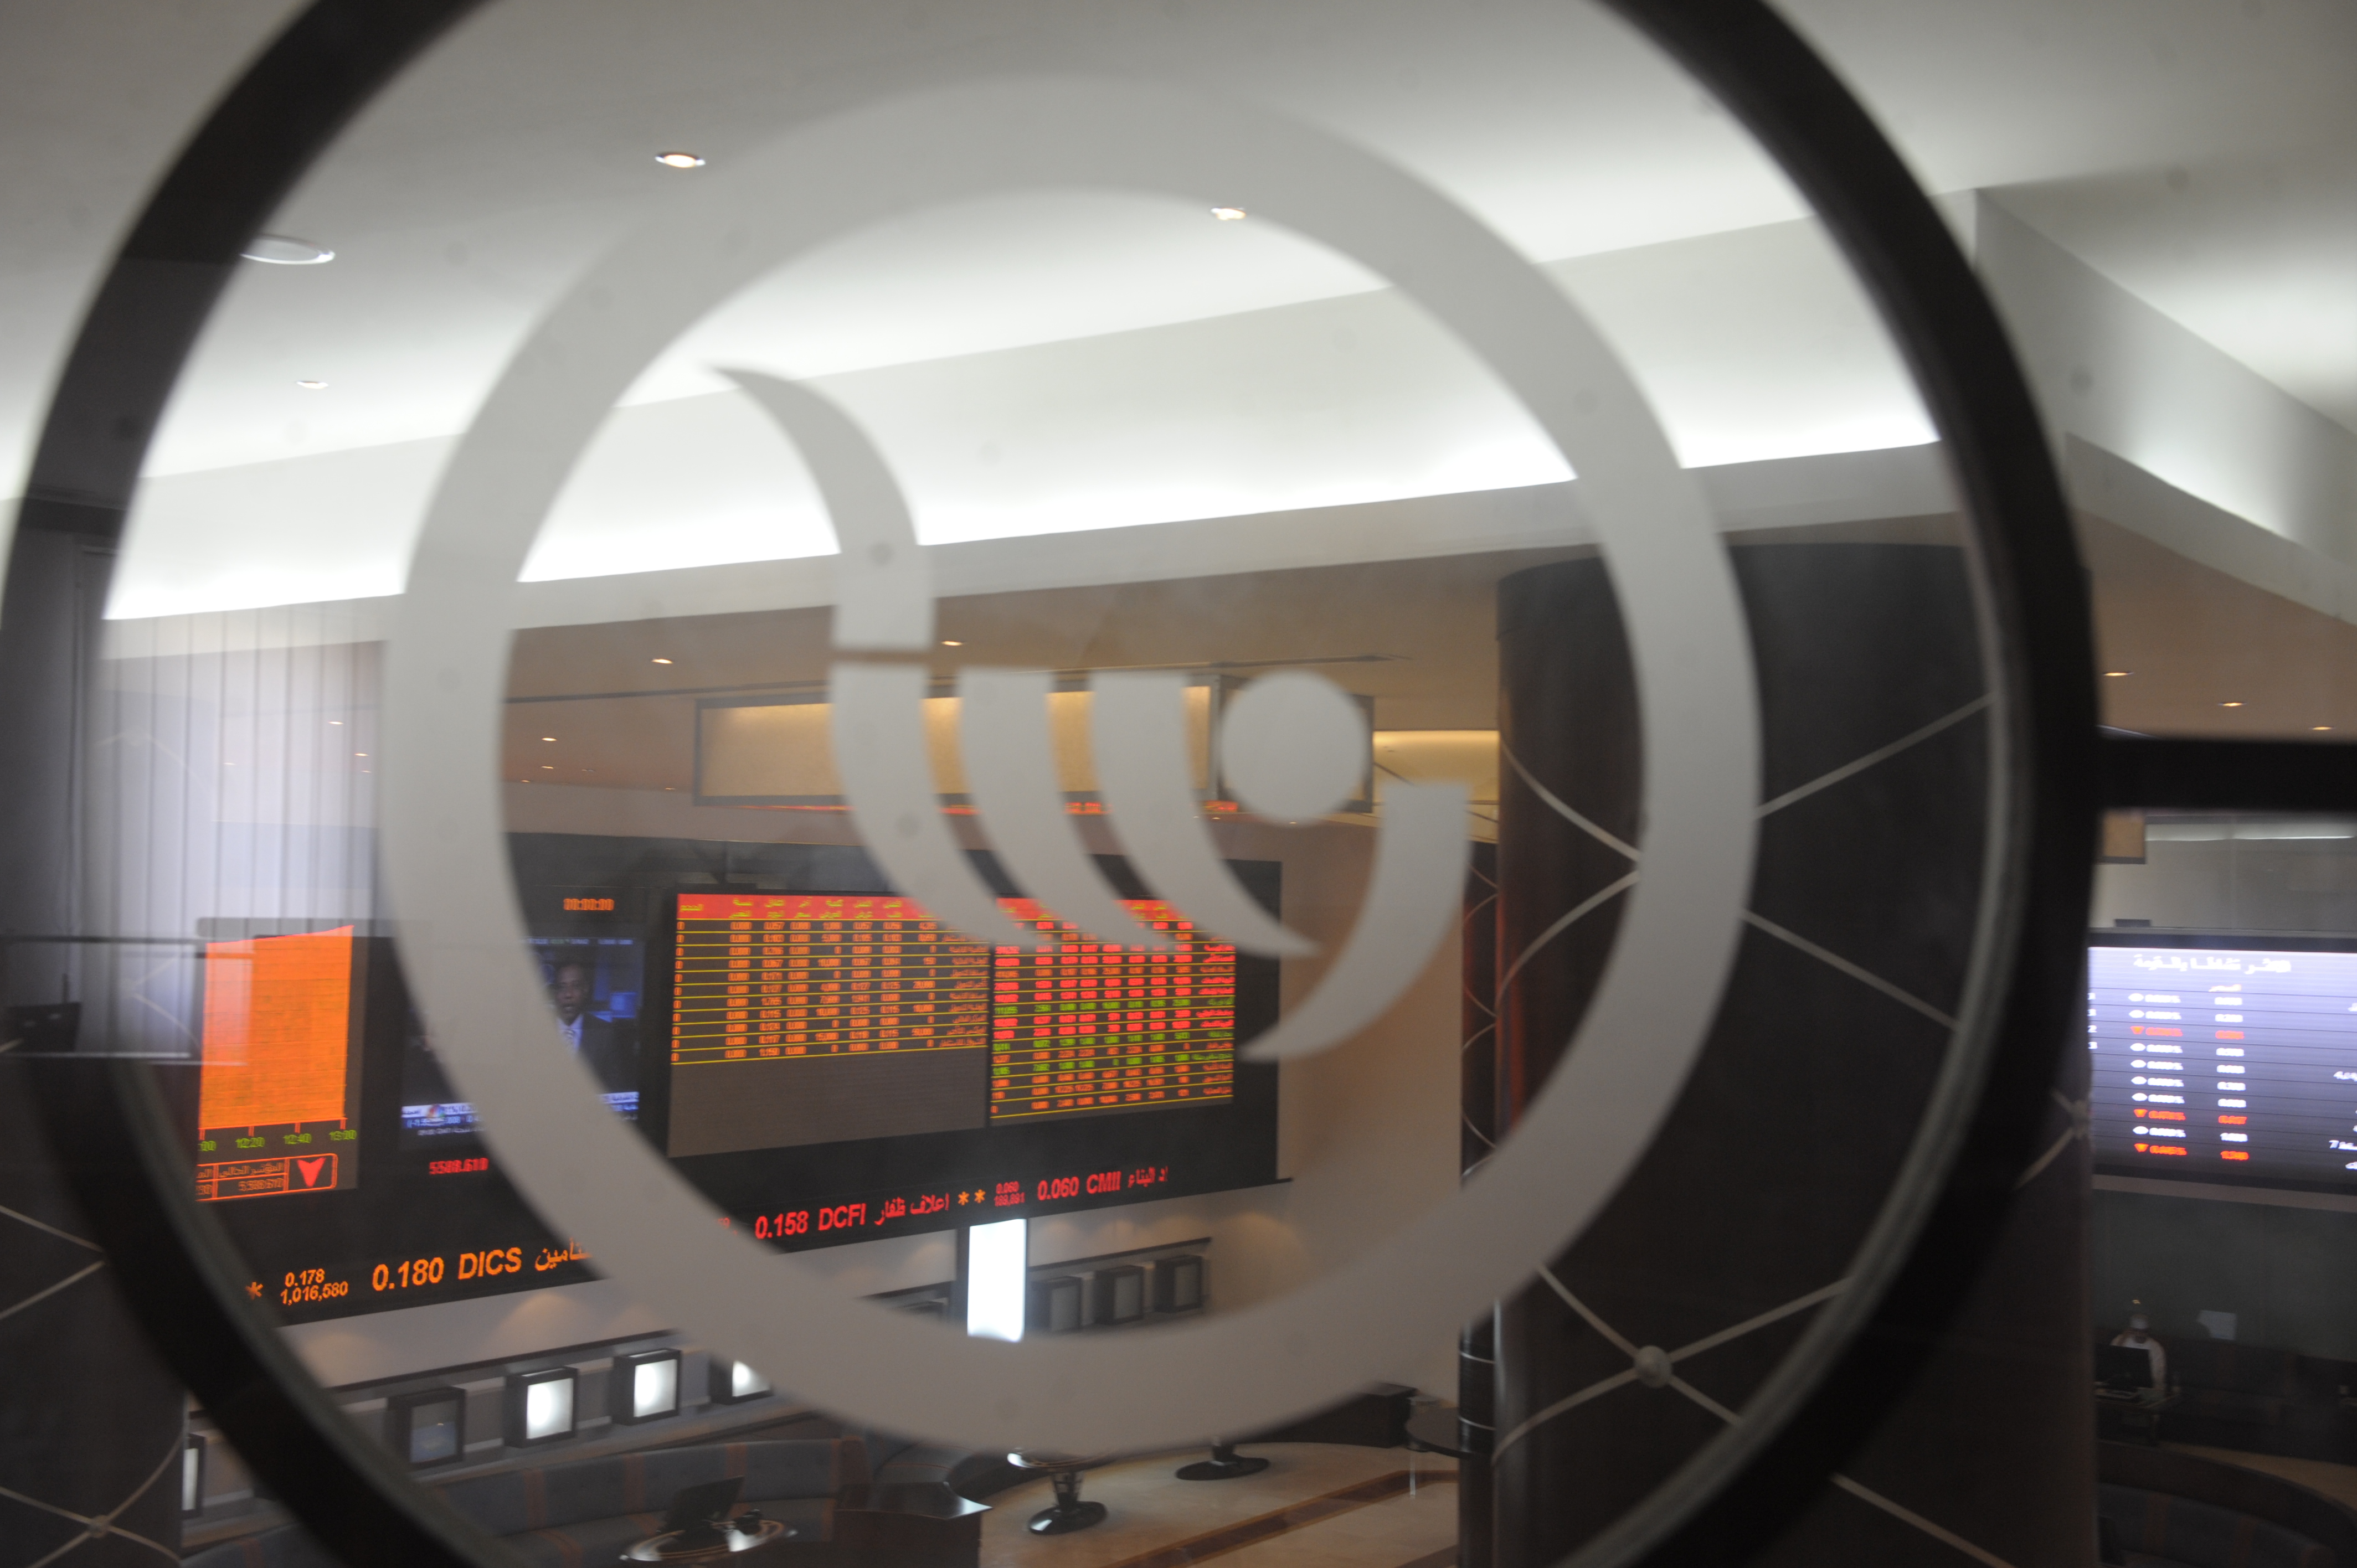 $2.5b raised from 8 IPOs across GCC in 3 months